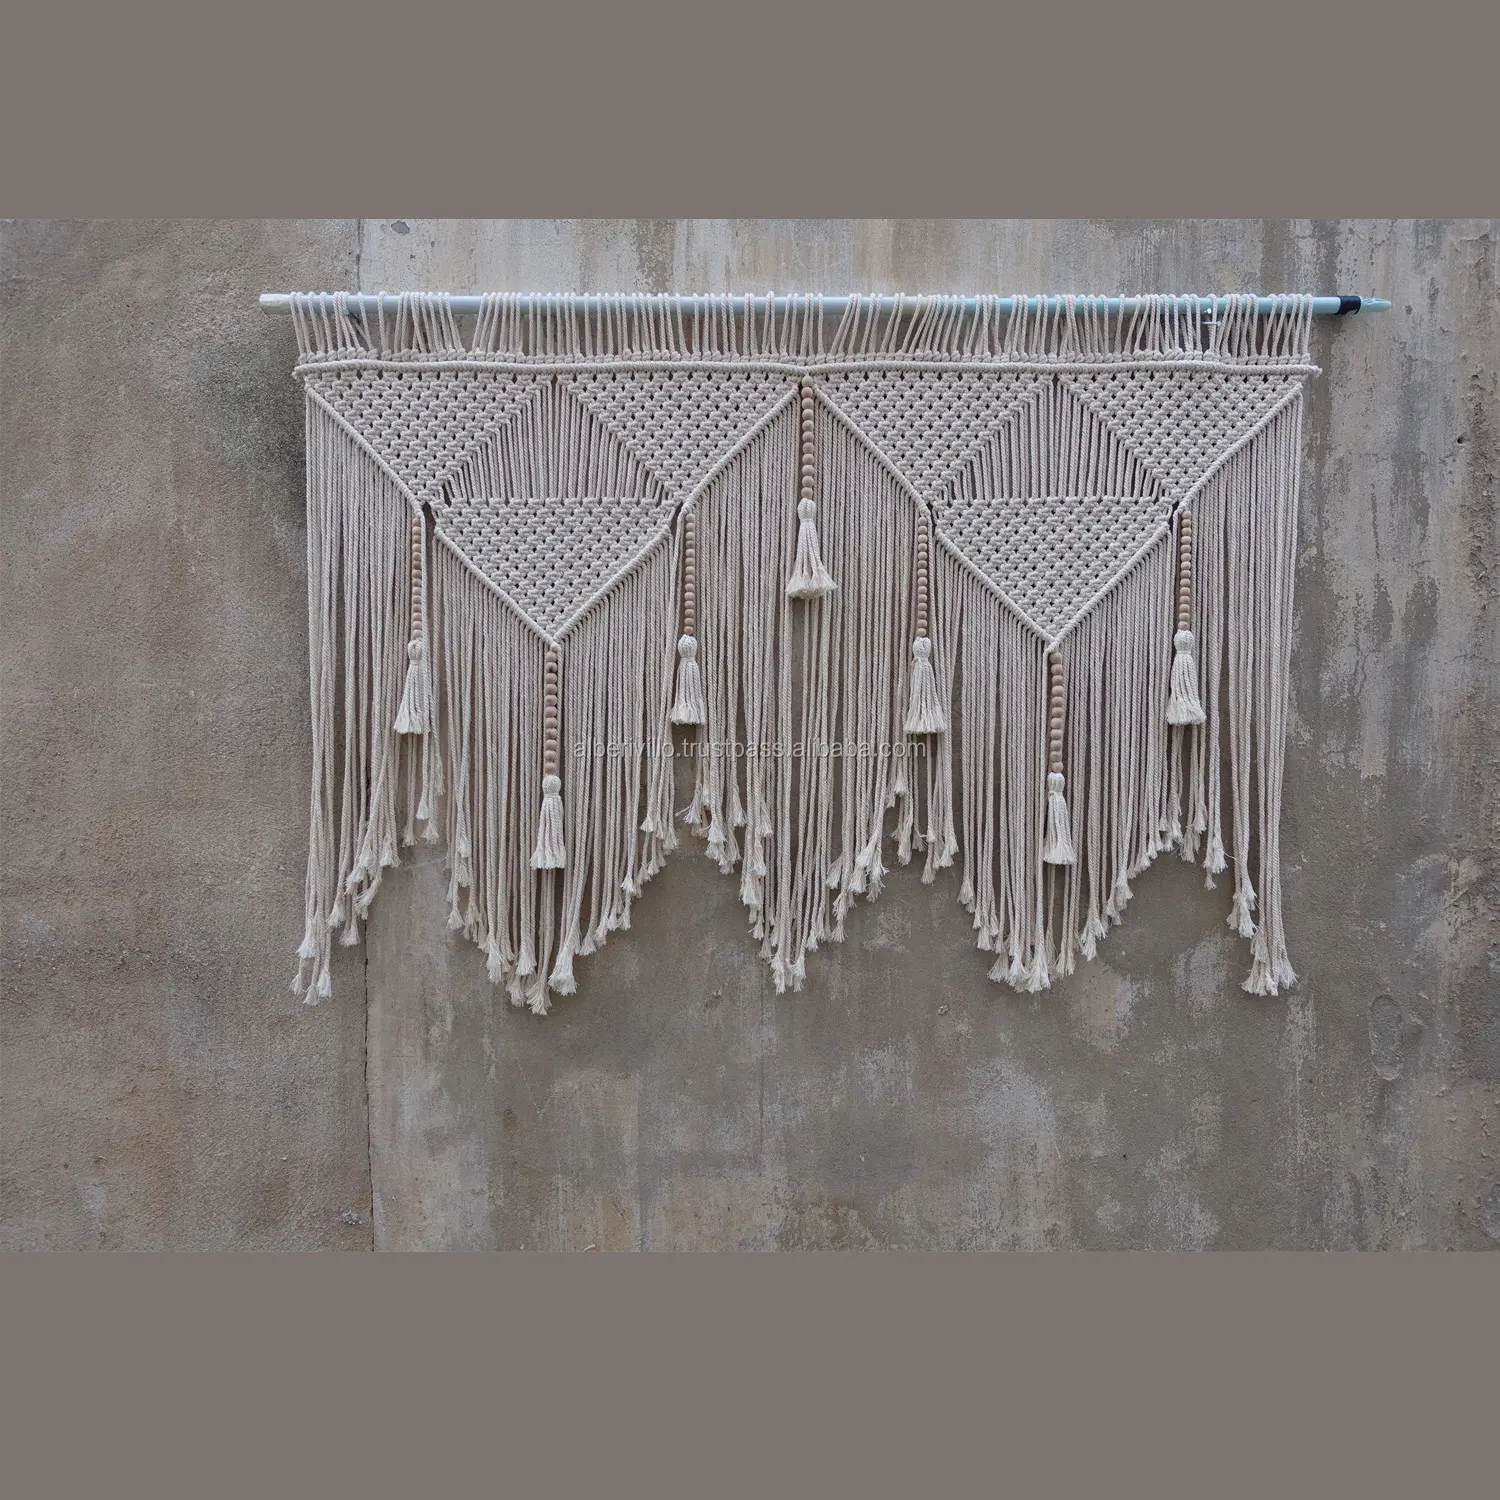 Beaded With Tassel White Colour Cotton Macrame Curtains Room Divider Boho Curtain Macrame Wall Curtains Hanging